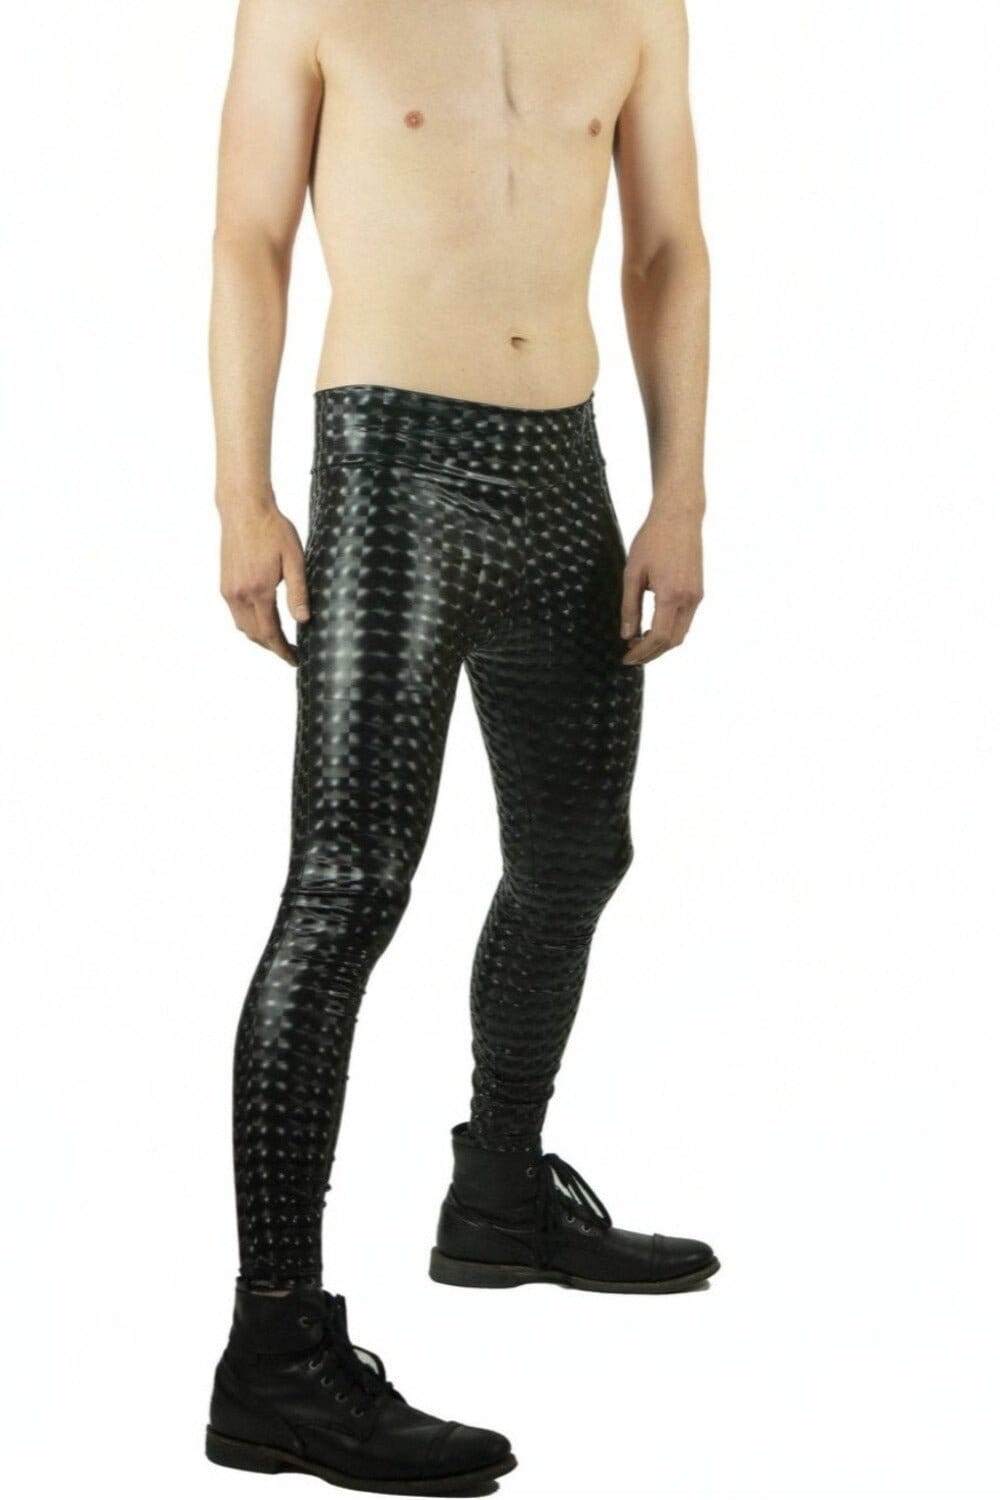 Mens Festival tights in holographic black vinyl with hidden pockets by Love Khaos